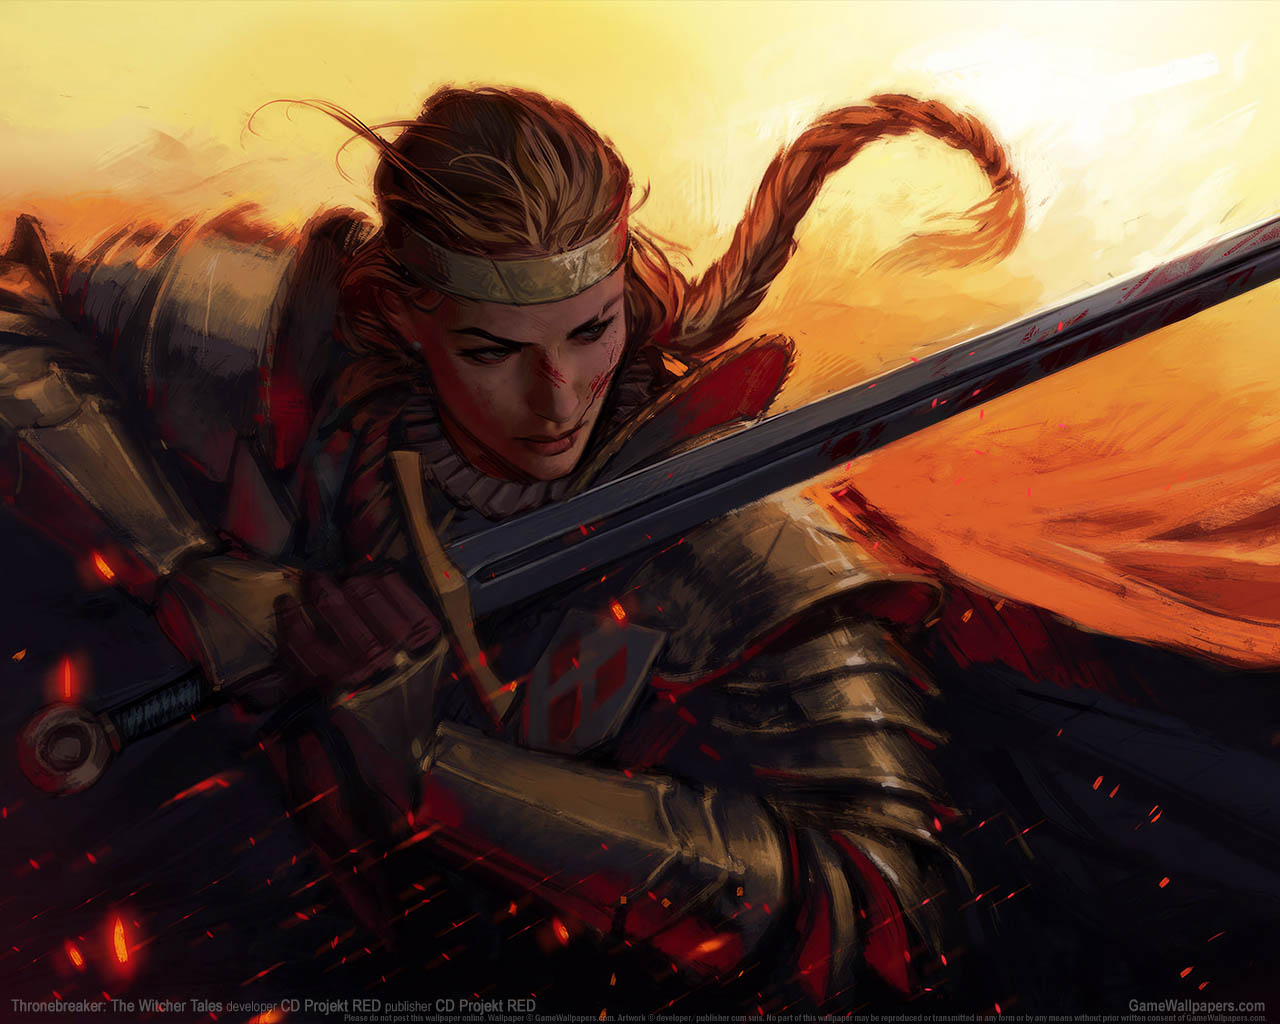 Thronebreaker%253A The Witcher Tales wallpaper 02 1280x1024